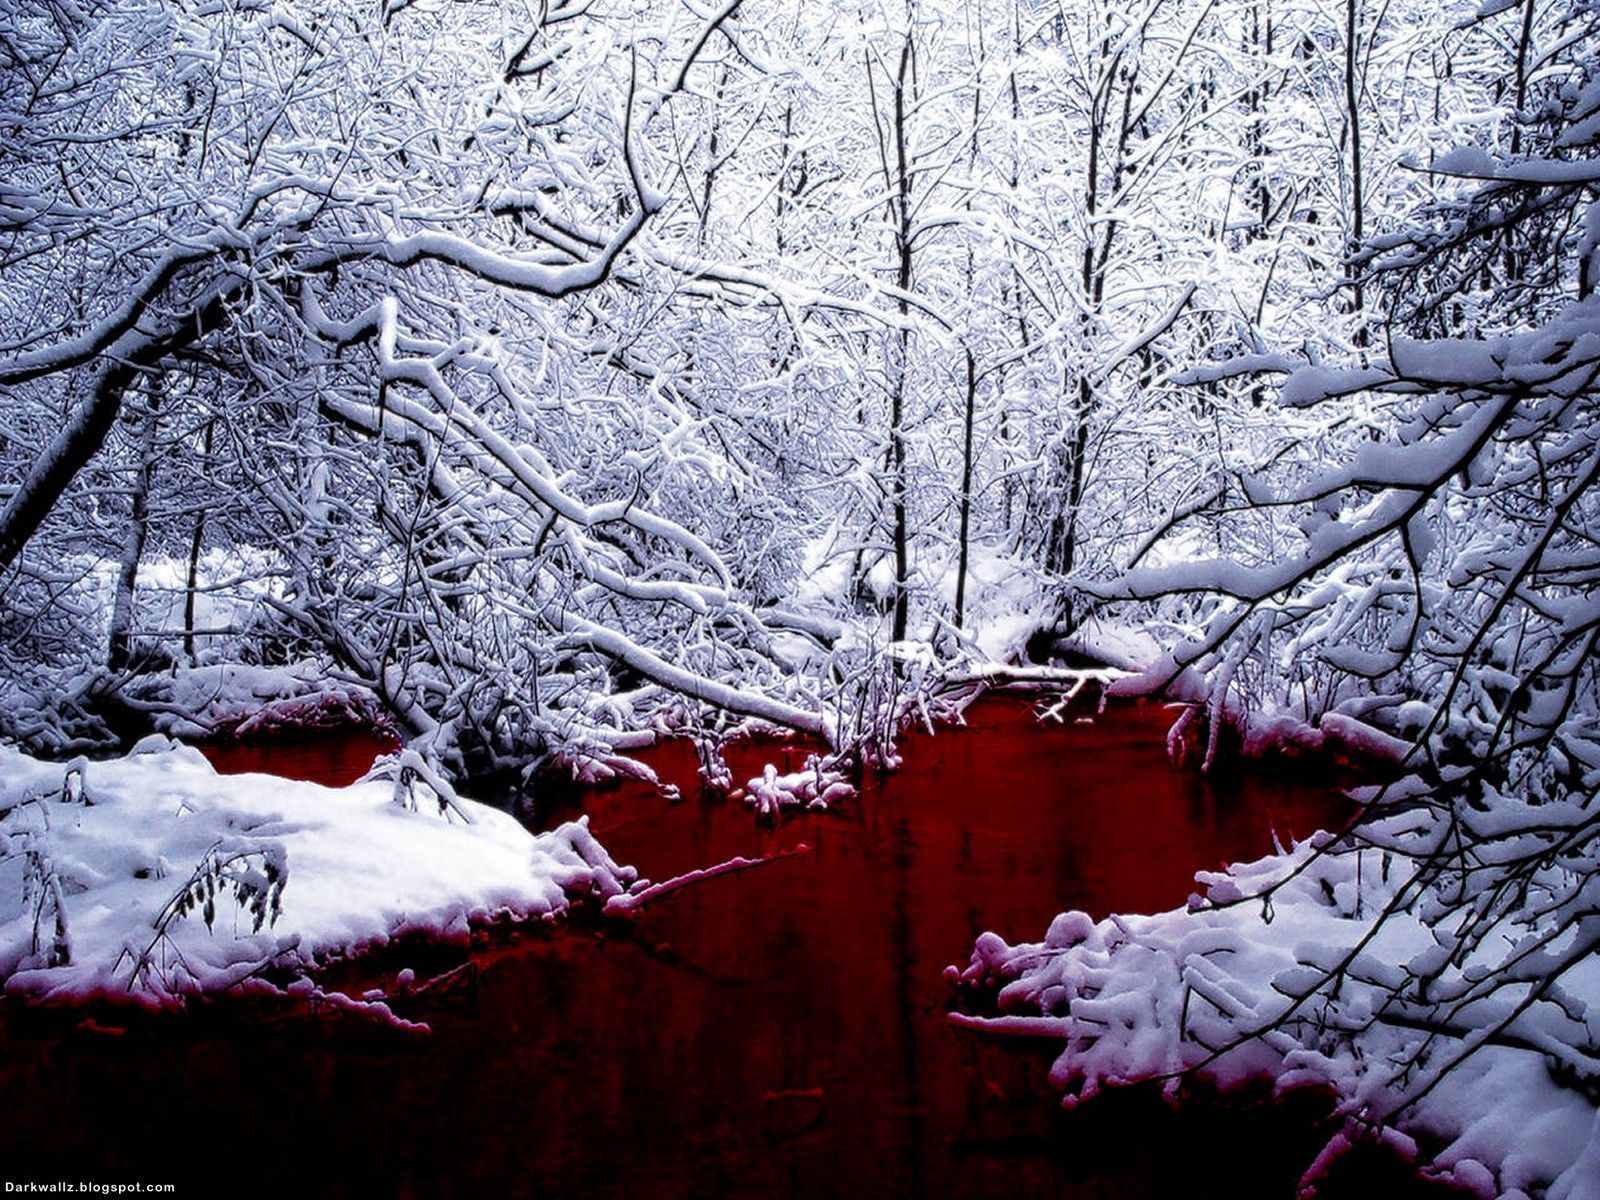 82 Blood HD Wallpapers Backgrounds - Wallpaper Abyss